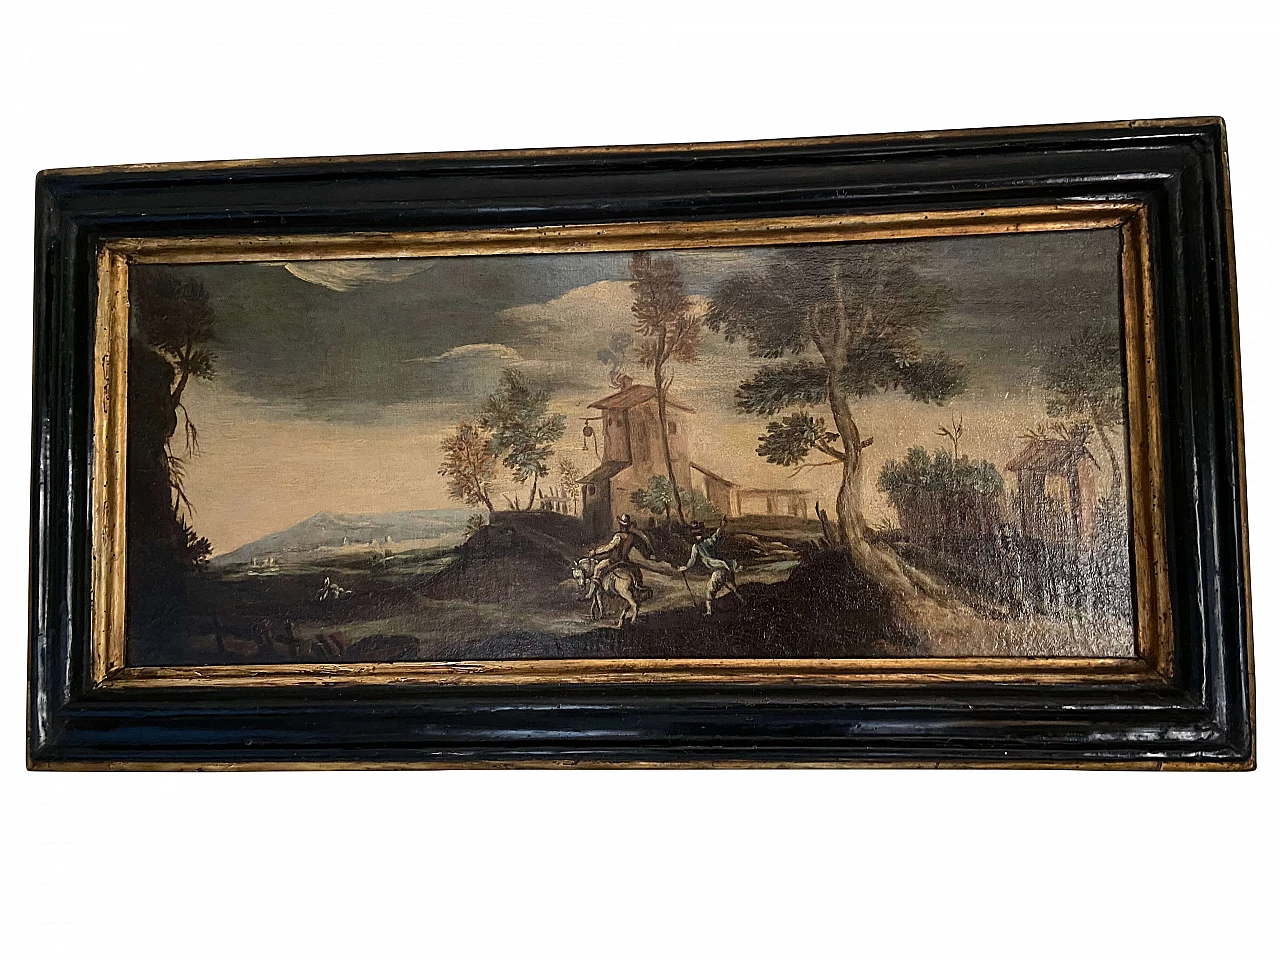 Second of a pair of Italian paintings with landscapes, 17th century 1176104